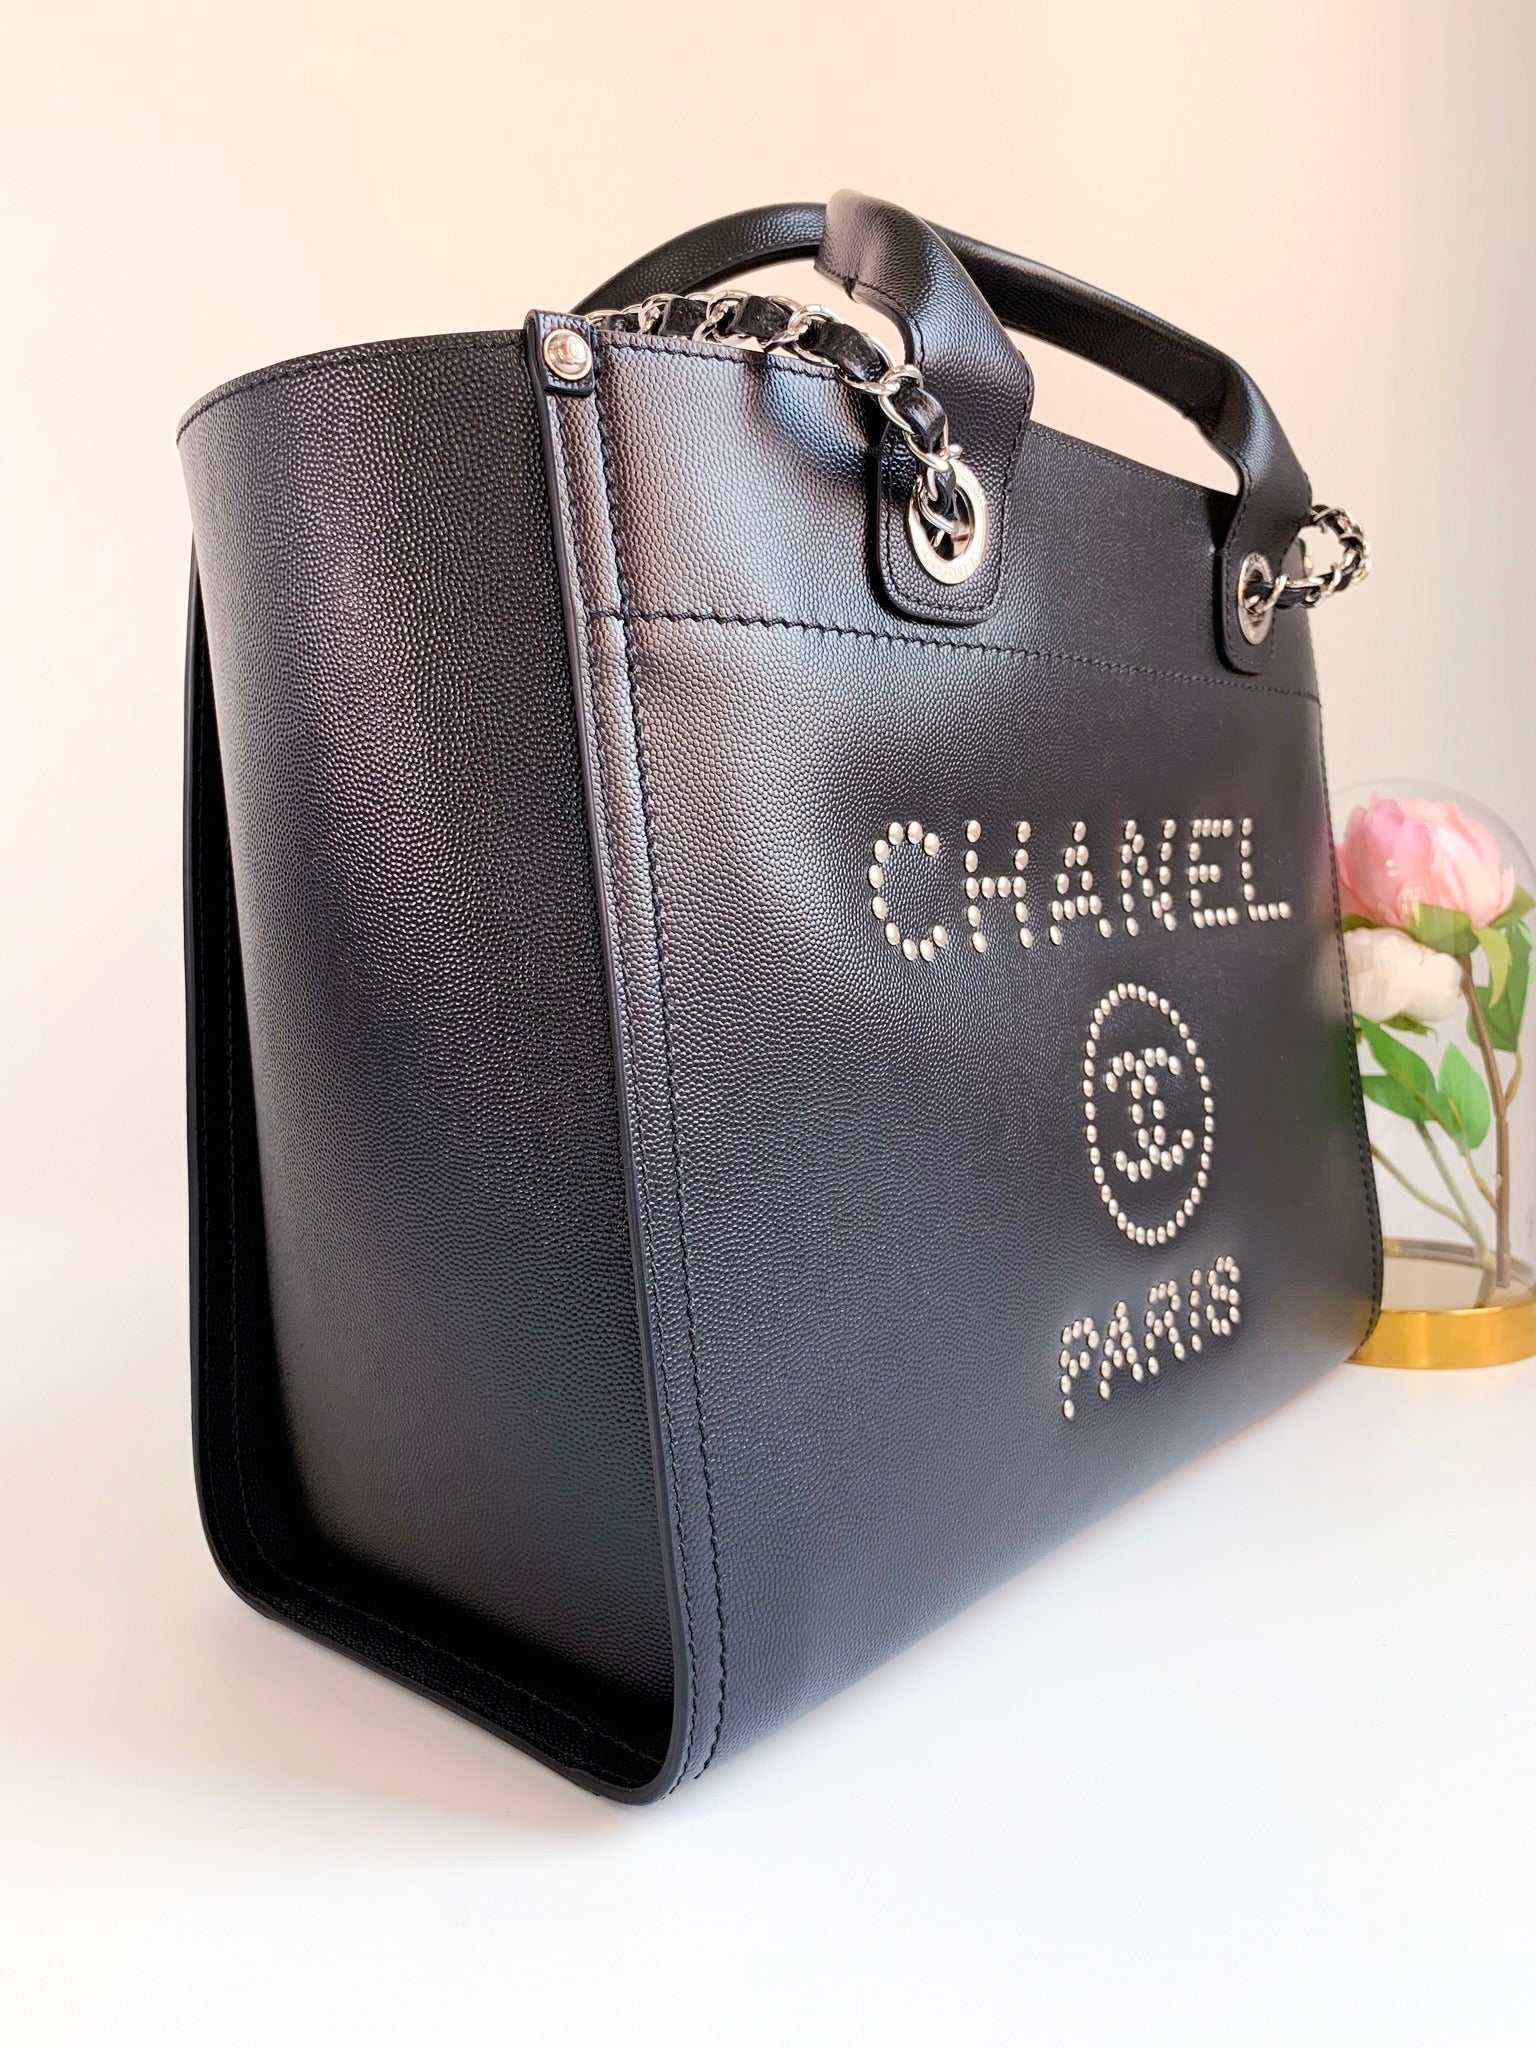 Chanel Deauville Small Shopping Leather Tote Bag Black